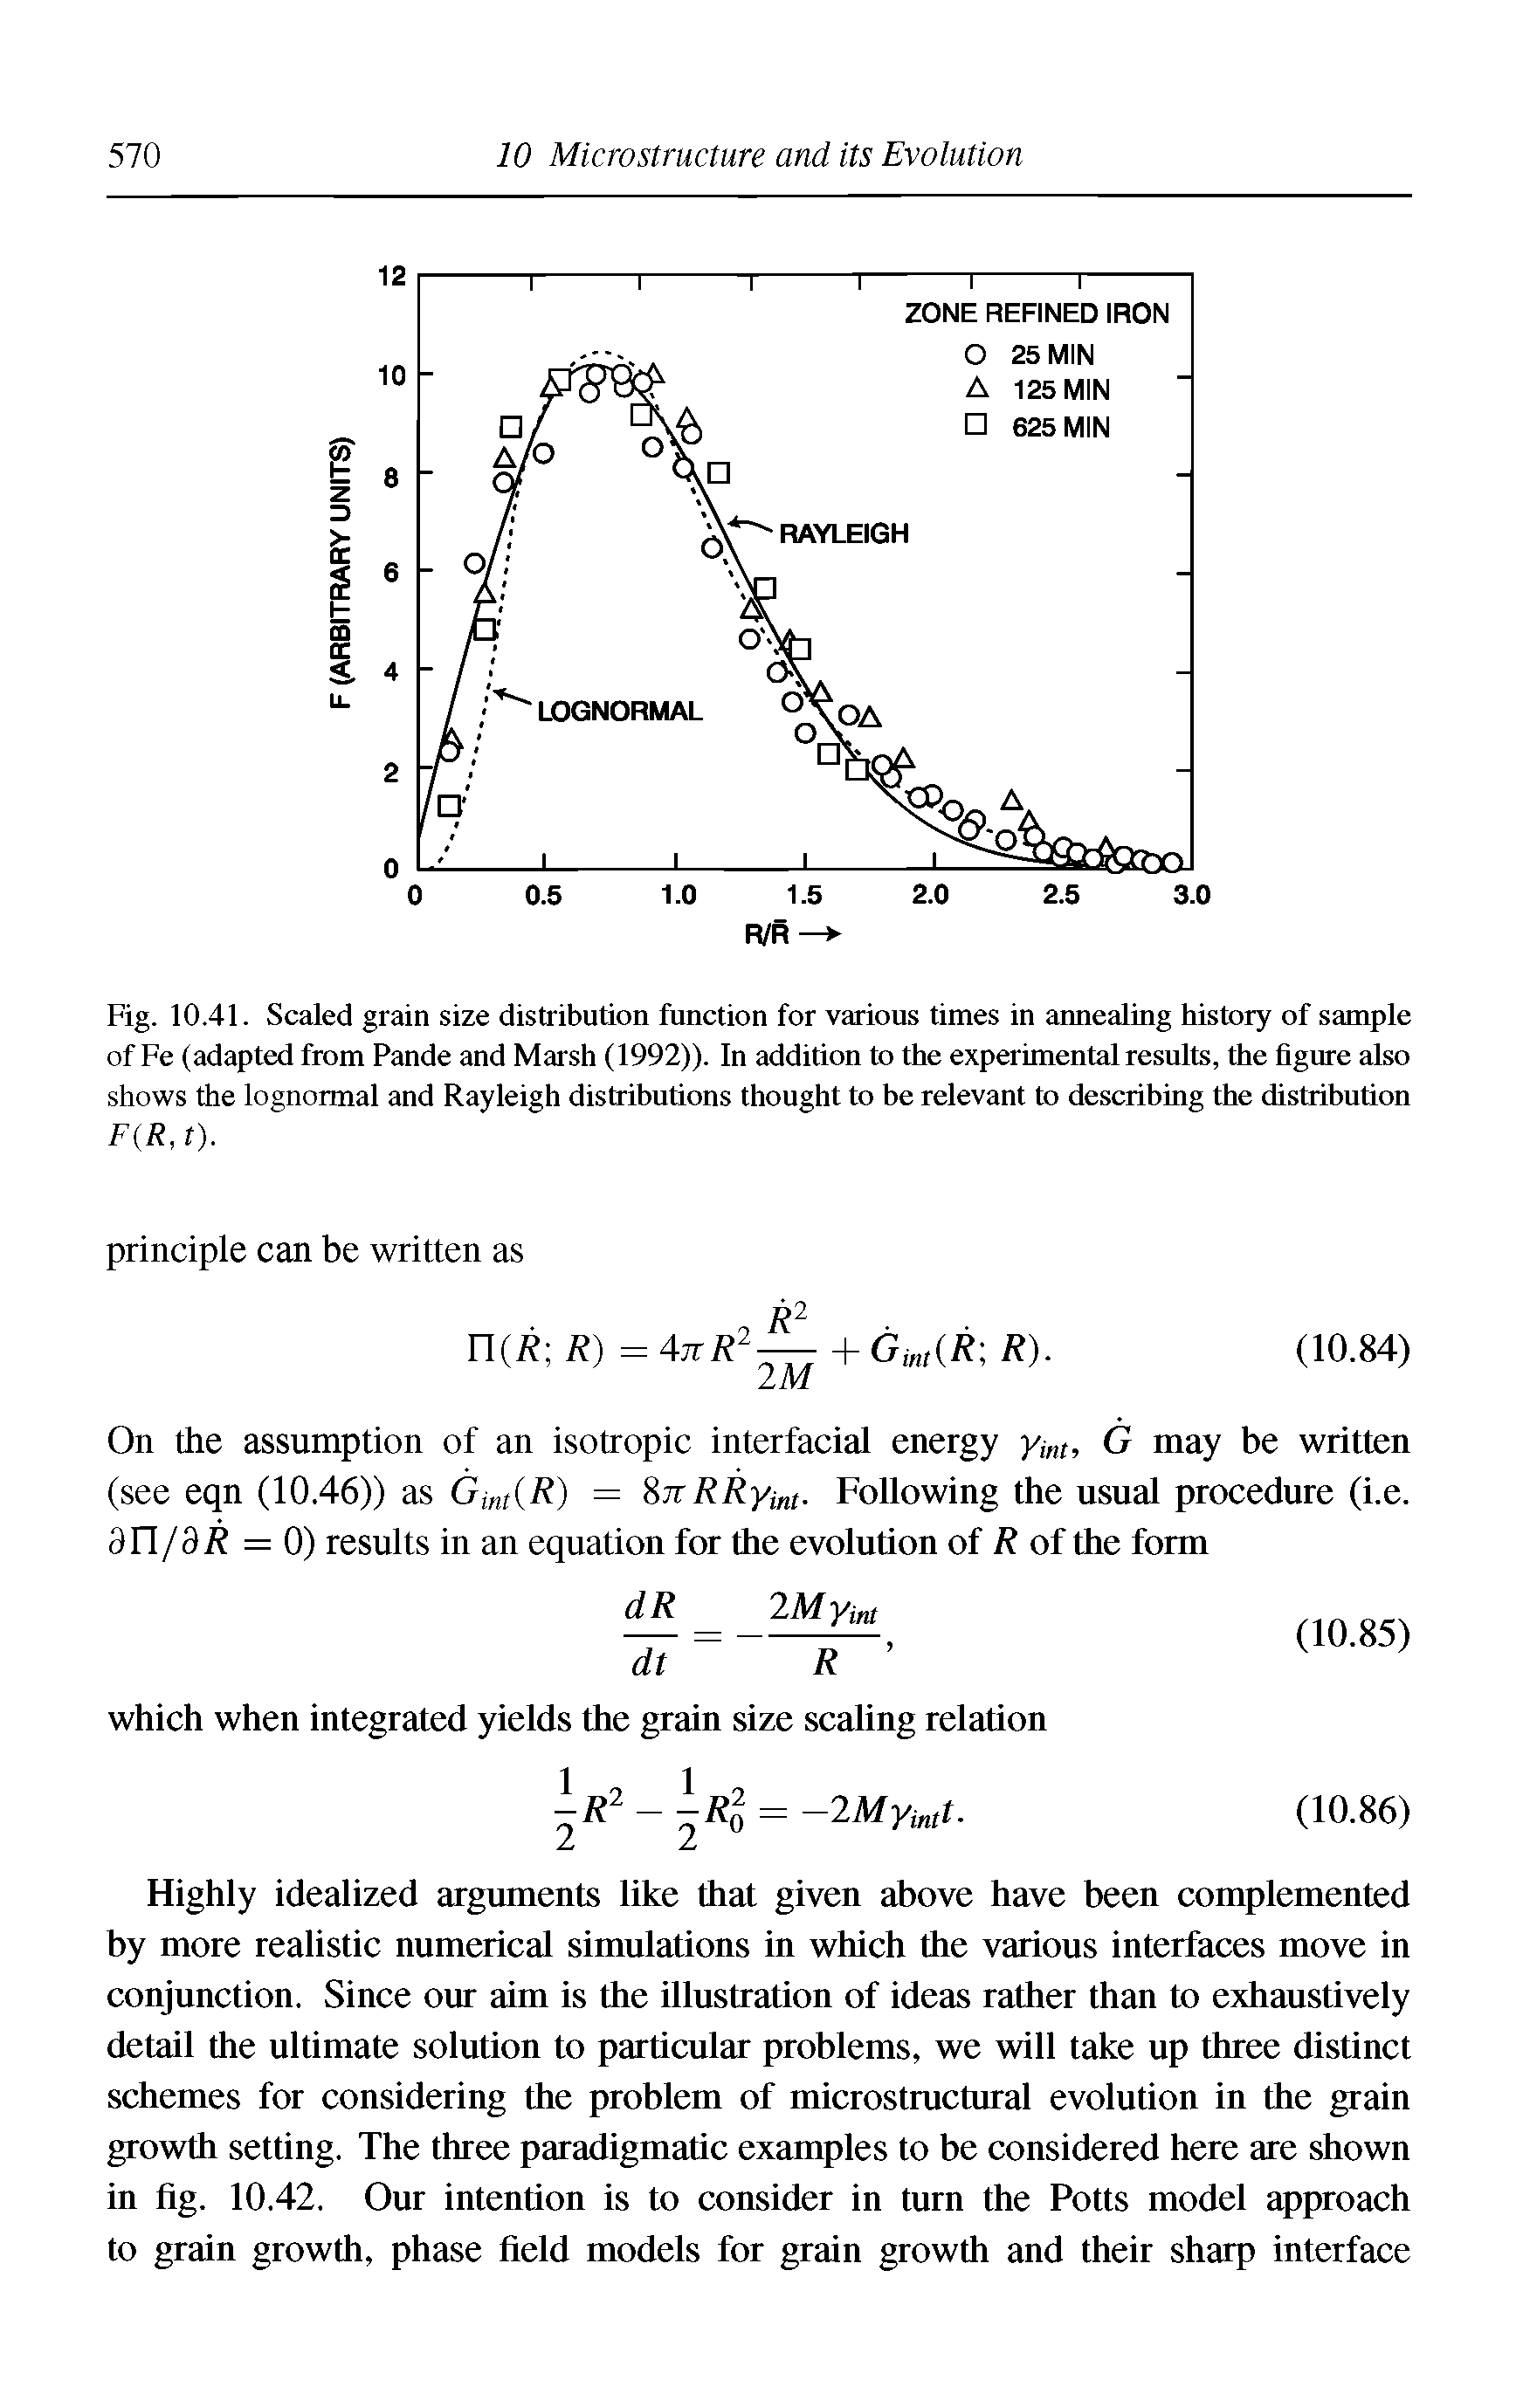 Fig. 10.41. Scaled grain size distribution function for various times in aimealing history of sample of Fe (adapted from Pande and Marsh (1992)). In addition to the experimental results, the figure also shows the lognormal and Rayleigh distributions thought to be relevant to describing the distribution...